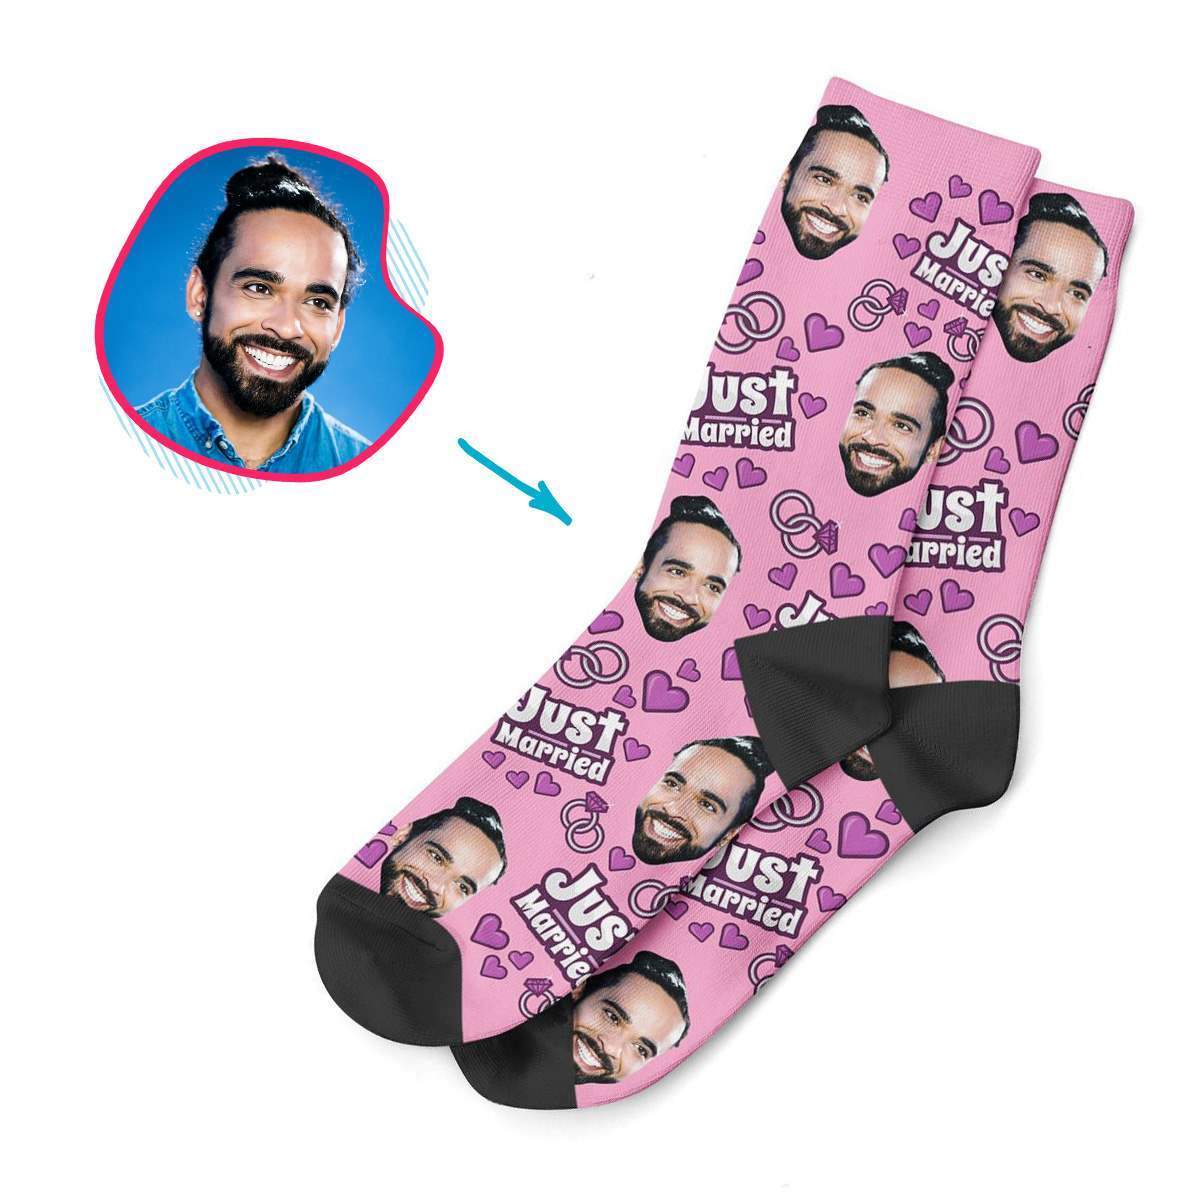 Just Married Personalized Socks